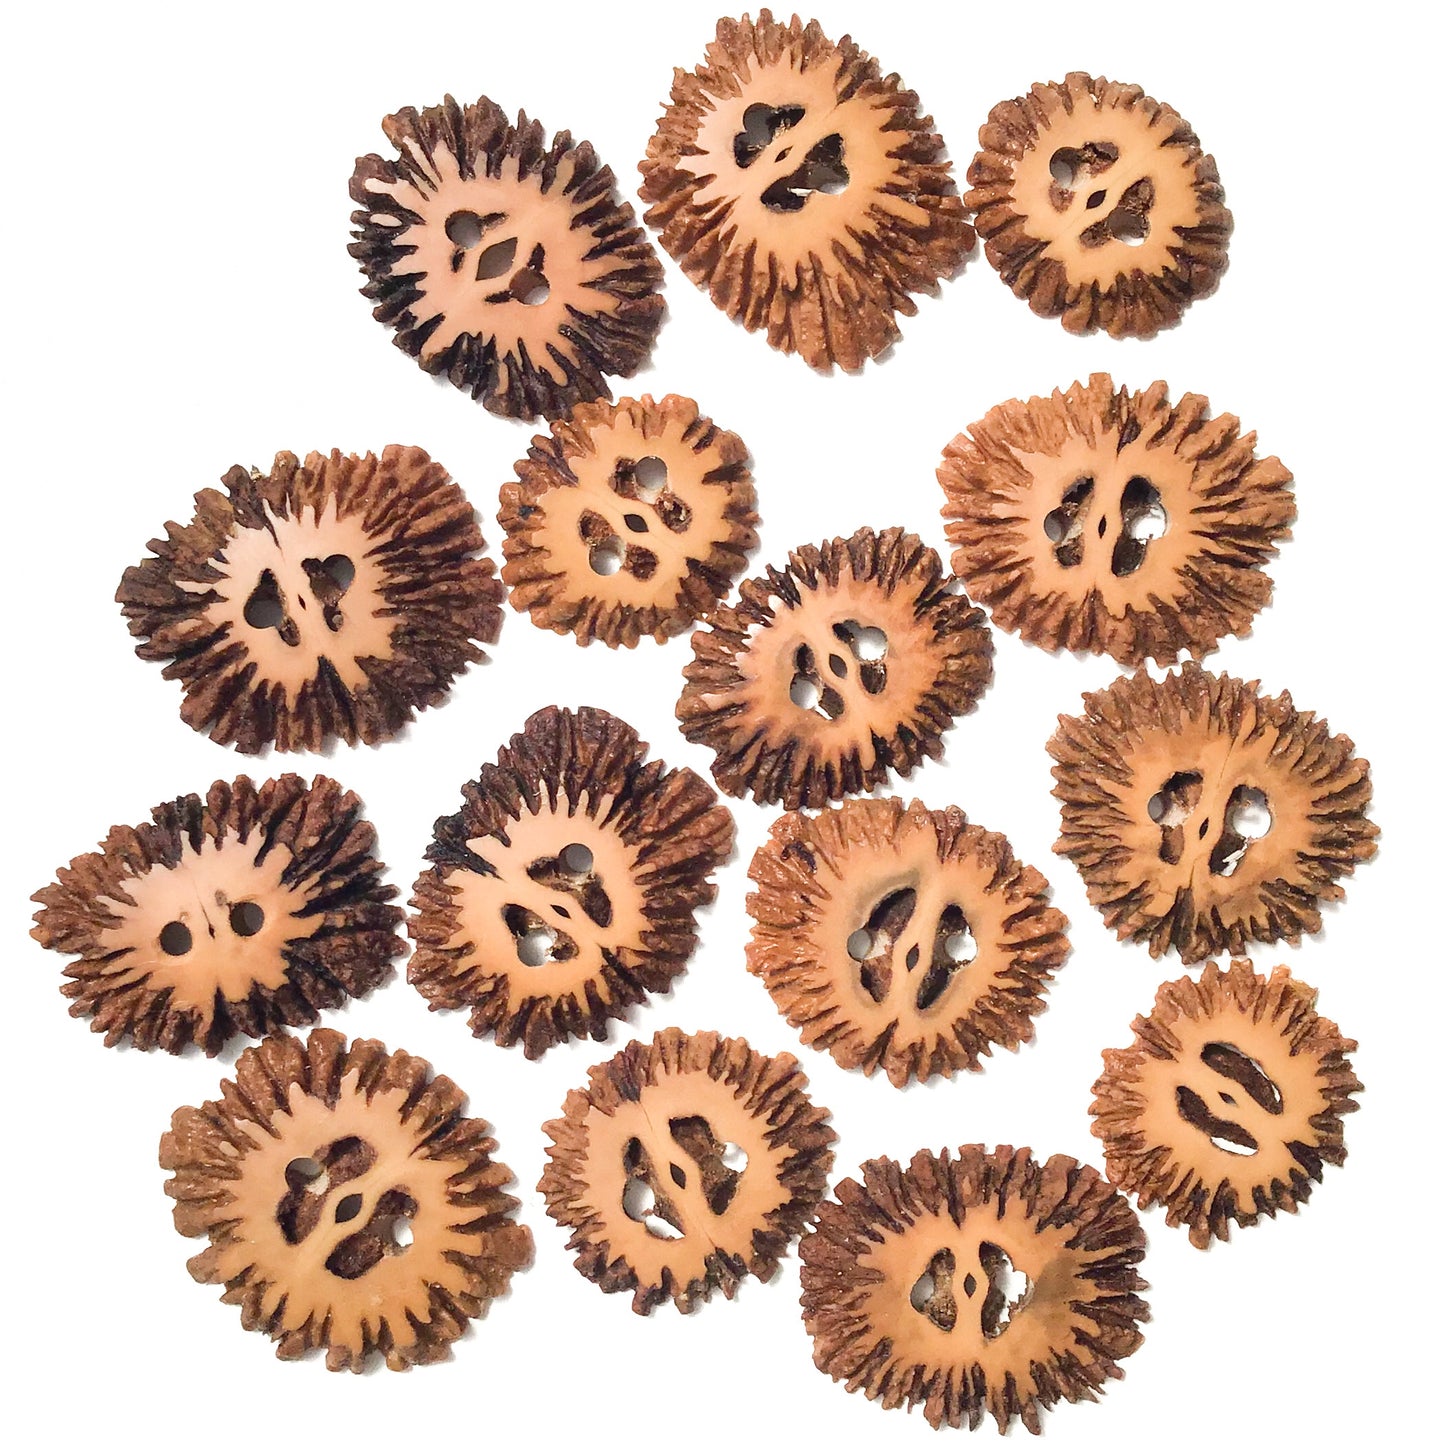 Black Walnut Shell Buttons - unique nut shell buttons